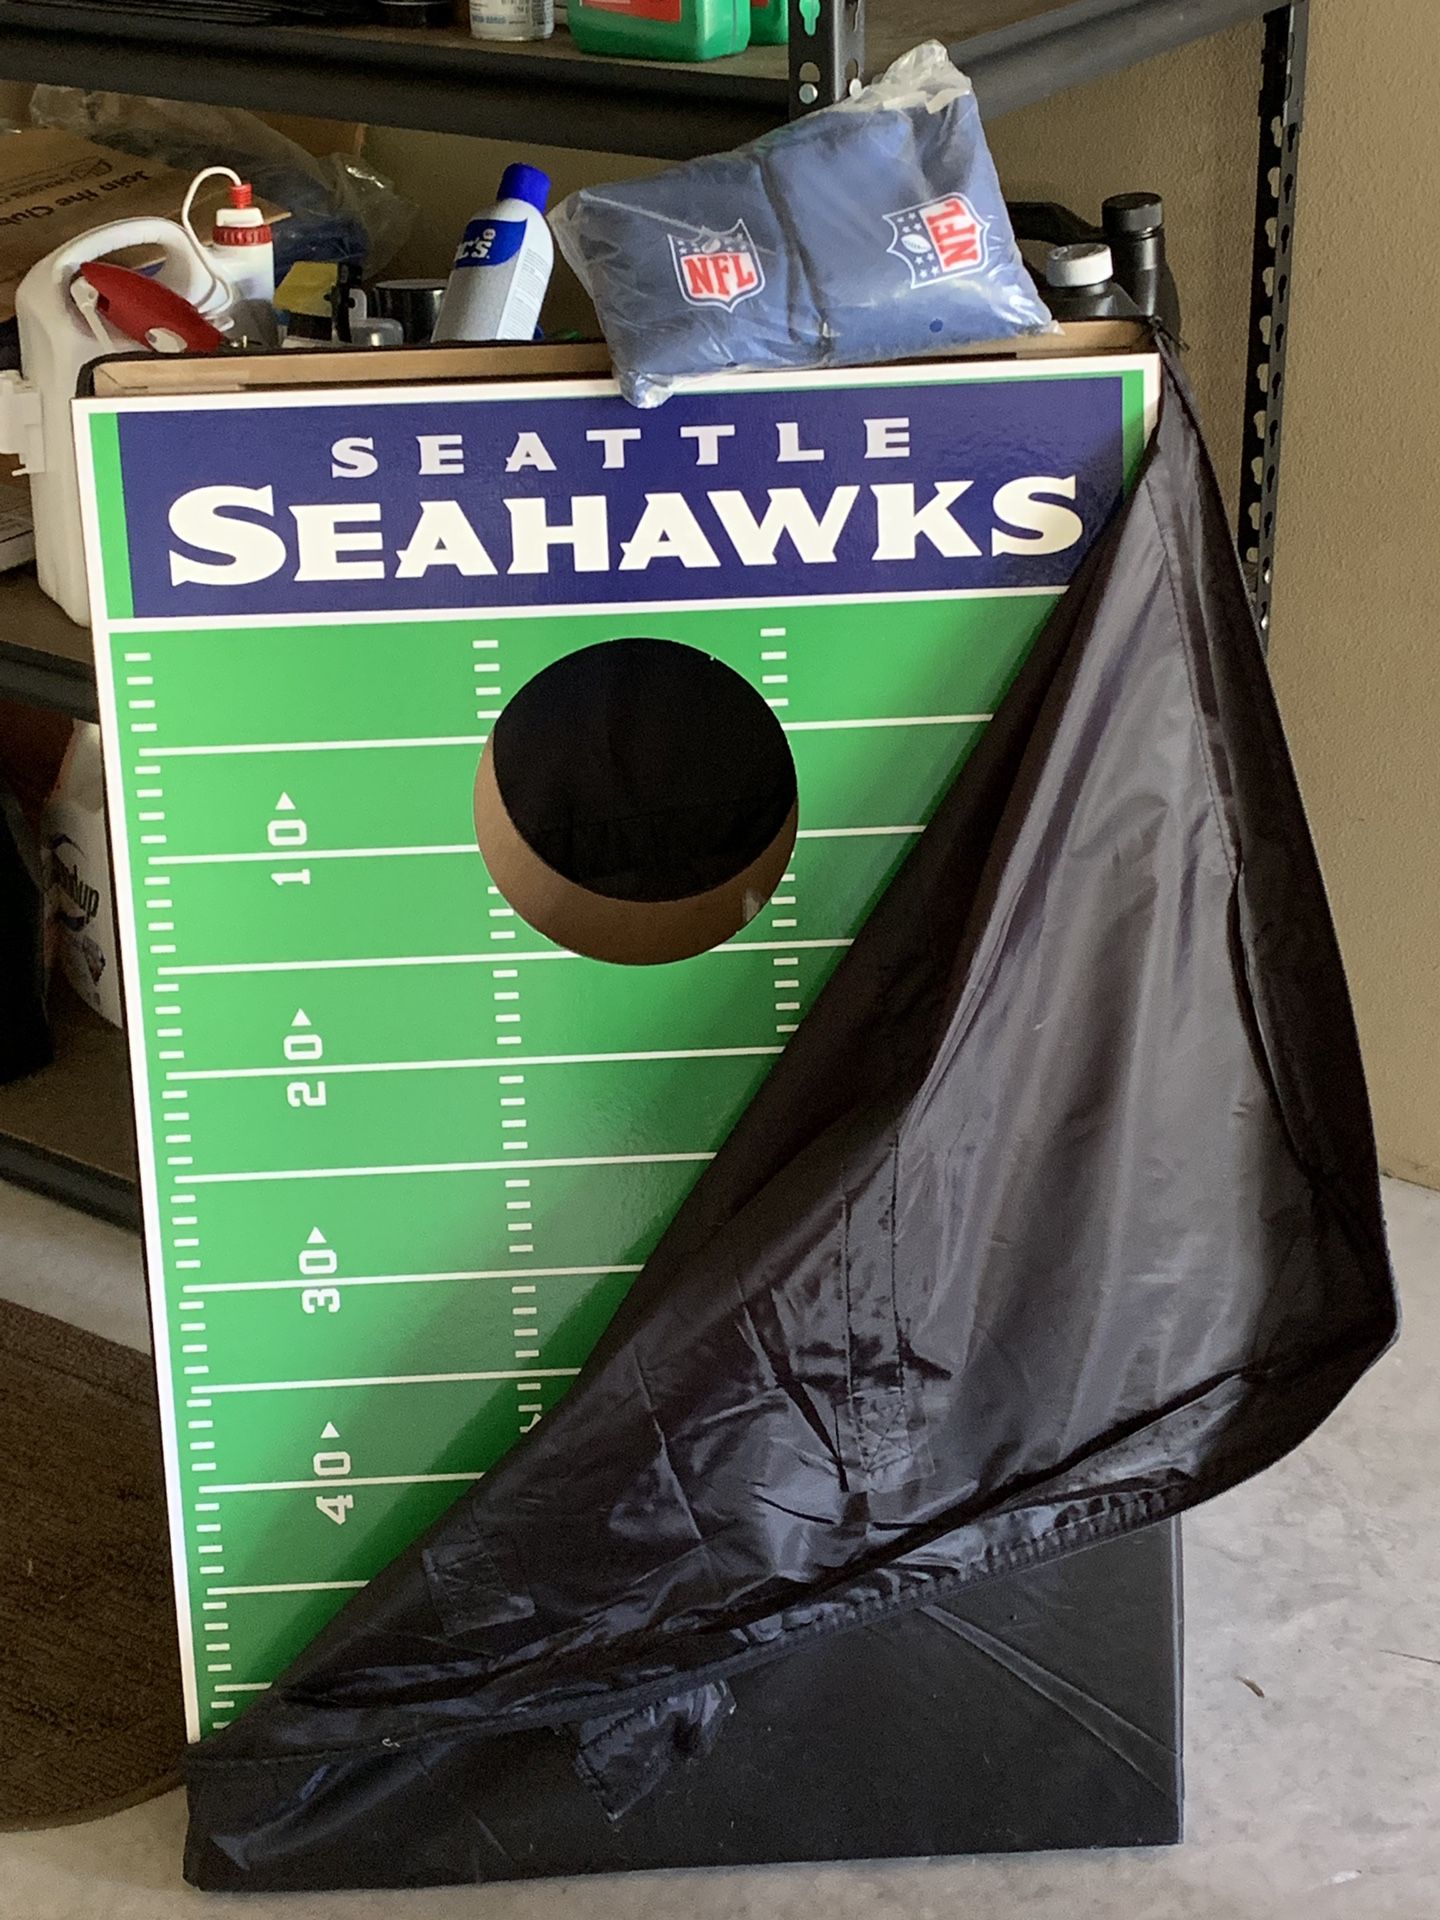 Seahawks Official NFL cornhole game